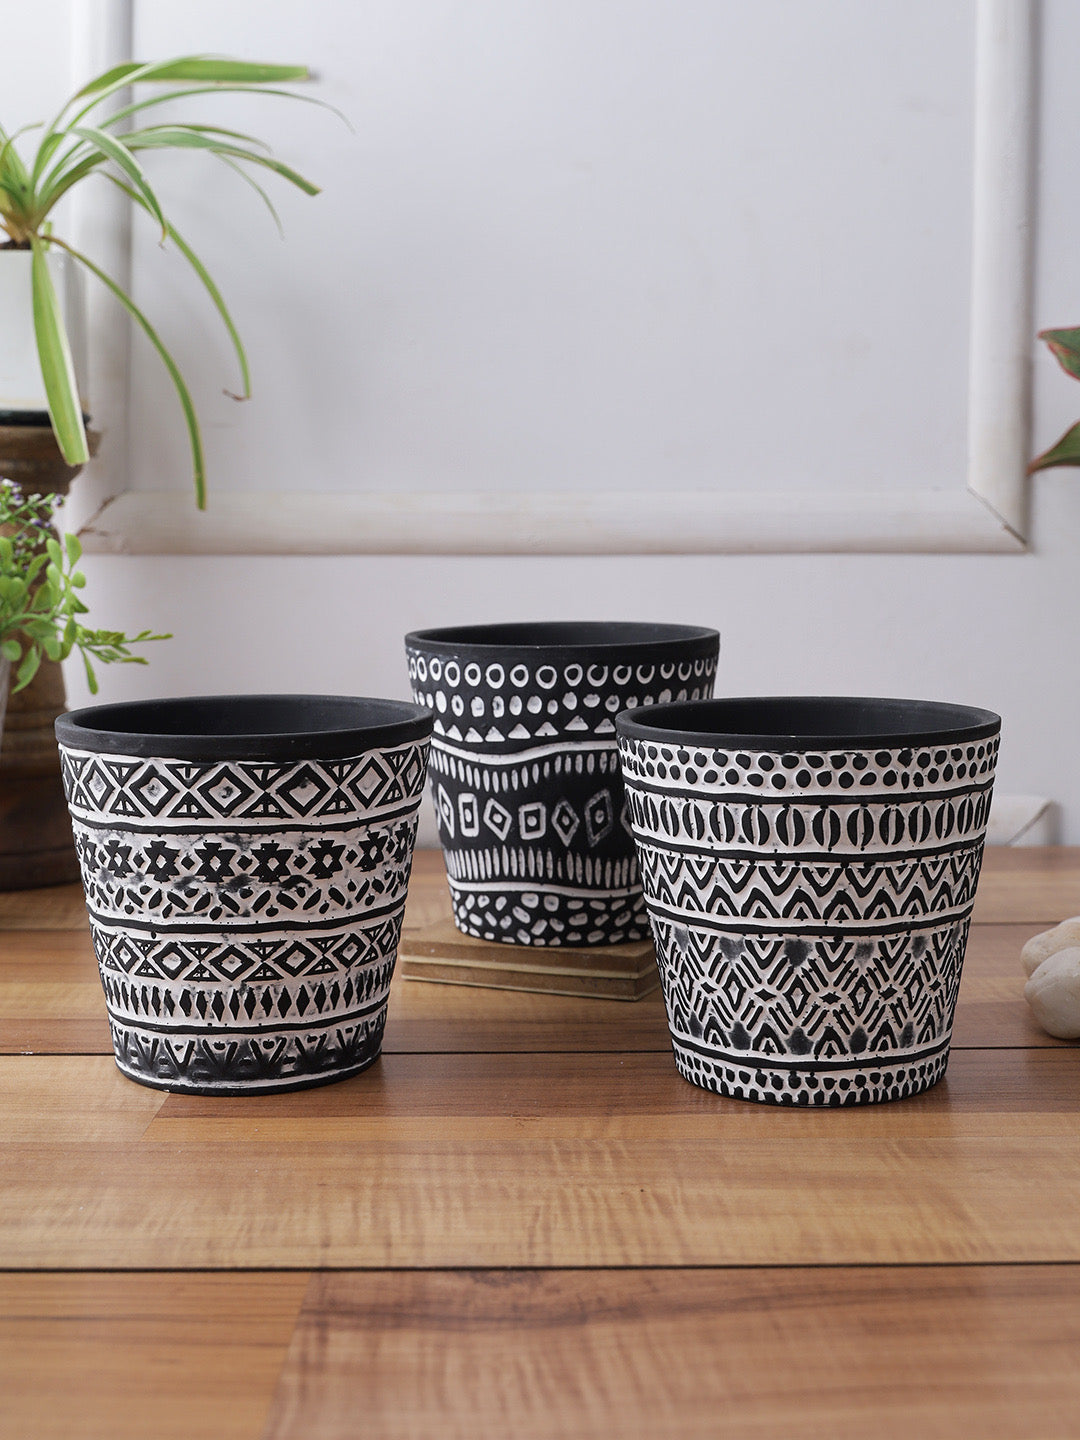 Set of 3 Black colored Planters with white tribal design - Default Title (CH210112_3)